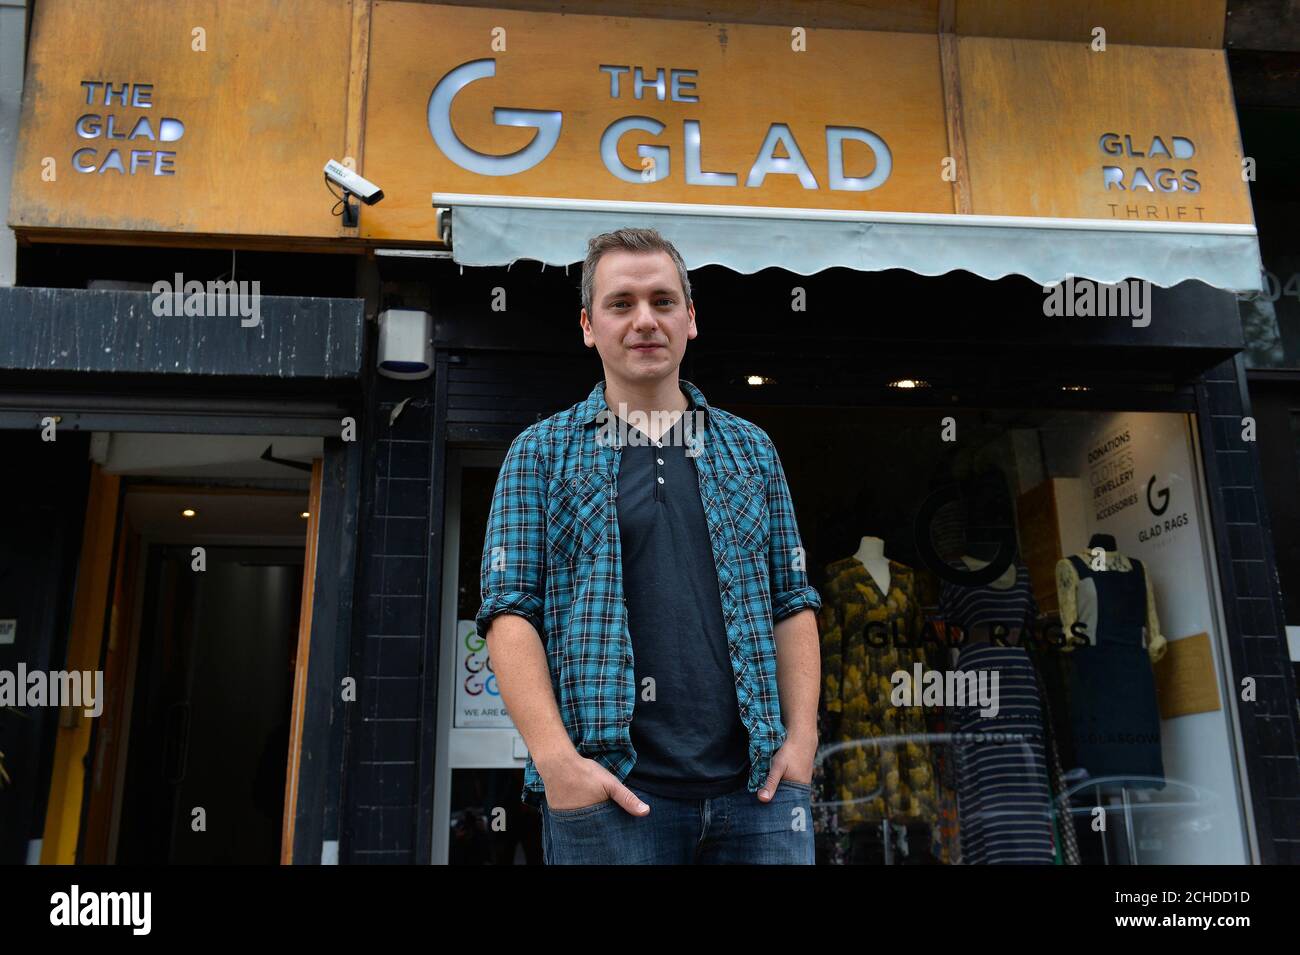 Joe Smillie representing The Glad Cafe, Avenue 77, Glasgow, one of the 38 high streets shortlisted in the Great British High Street Awards 2018, which is sponsored by Visa and being run by the Ministry of Housing, Communities & Local Government. Stock Photo